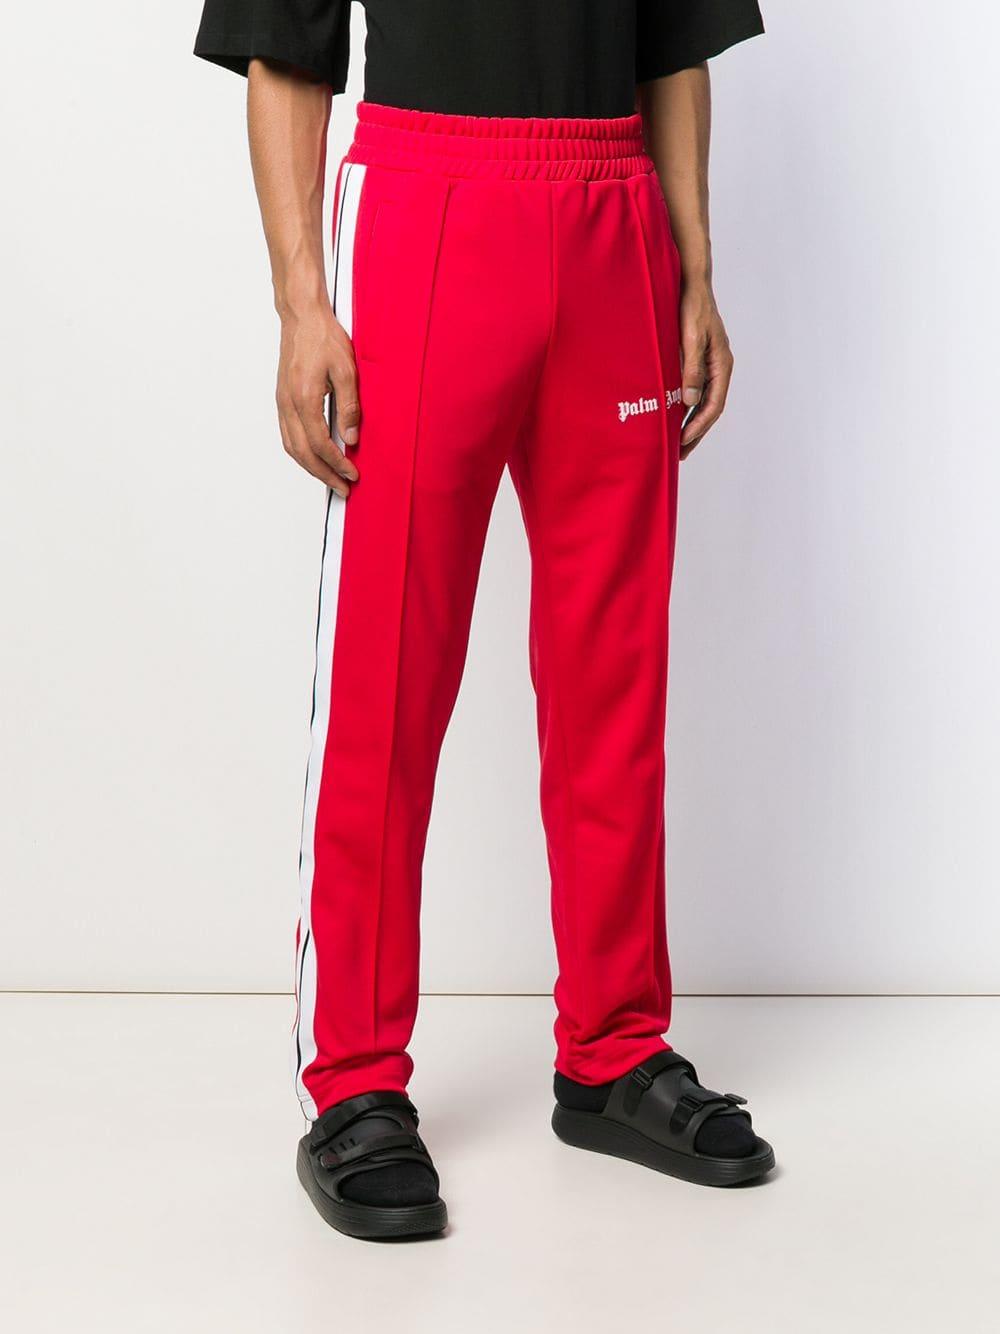 Palm Angels Denim Side-striped Track Pants in Red for Men - Lyst